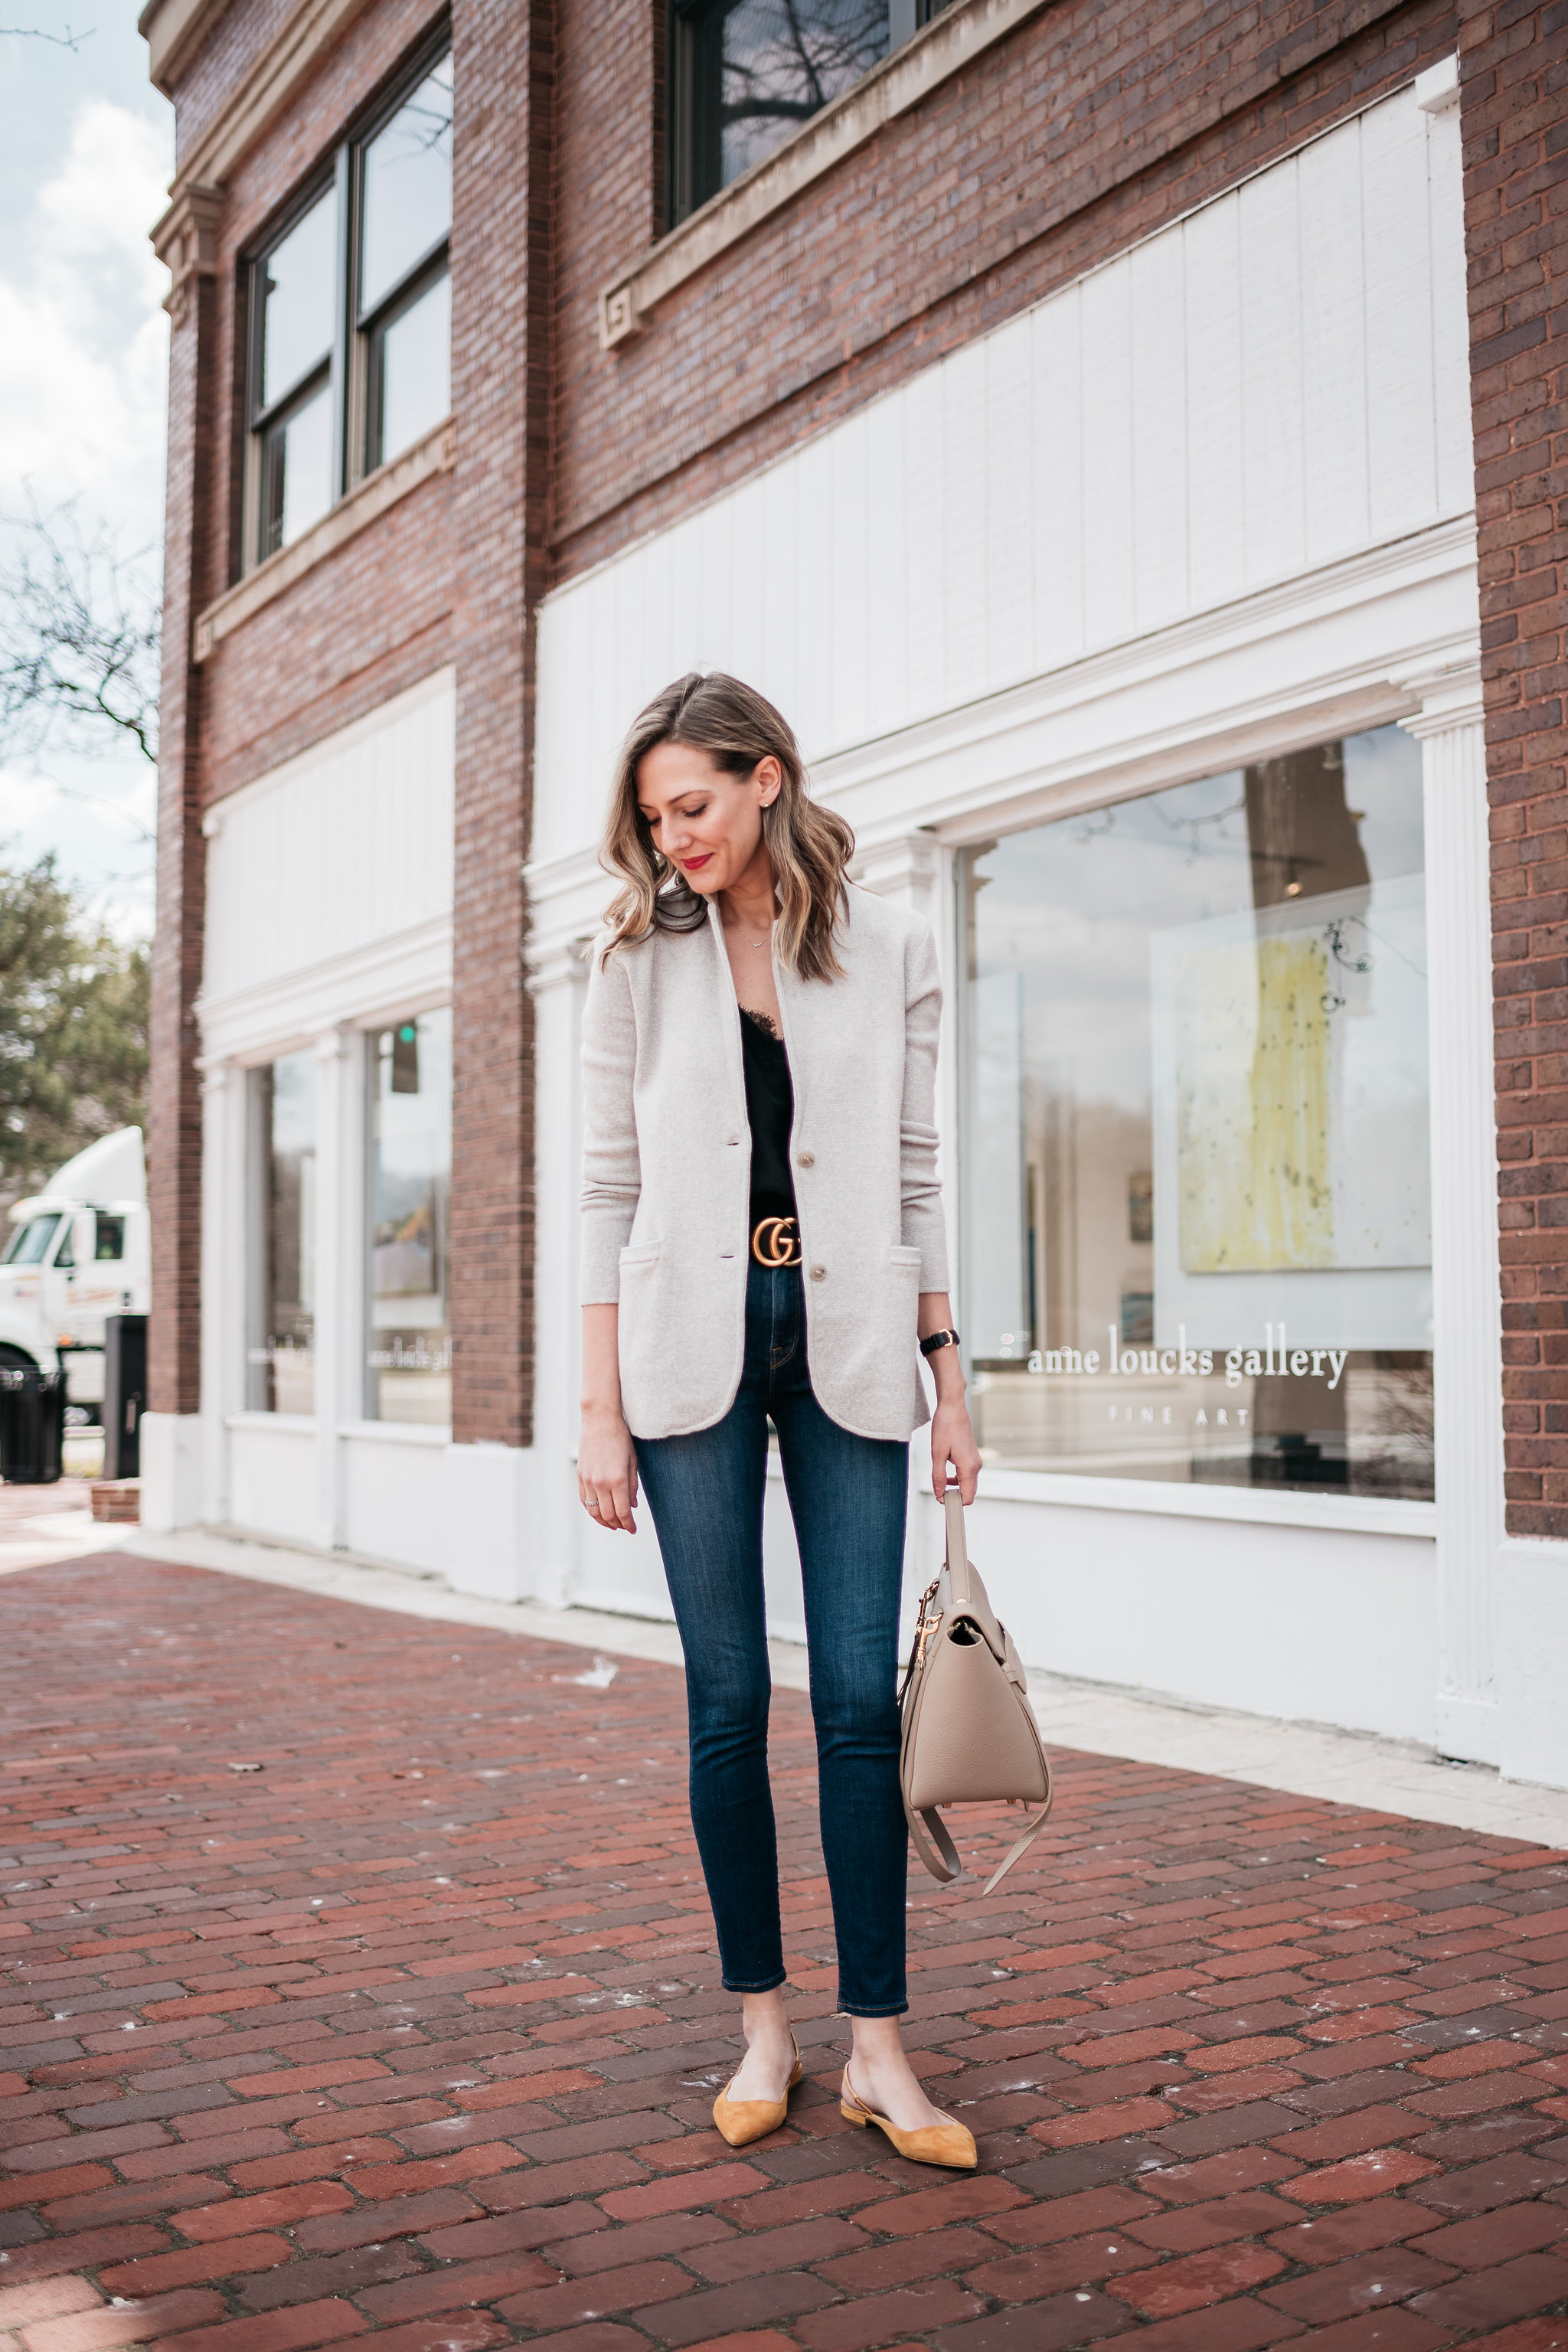 best everyday outfit ideas chic look jeans with flats and blazer